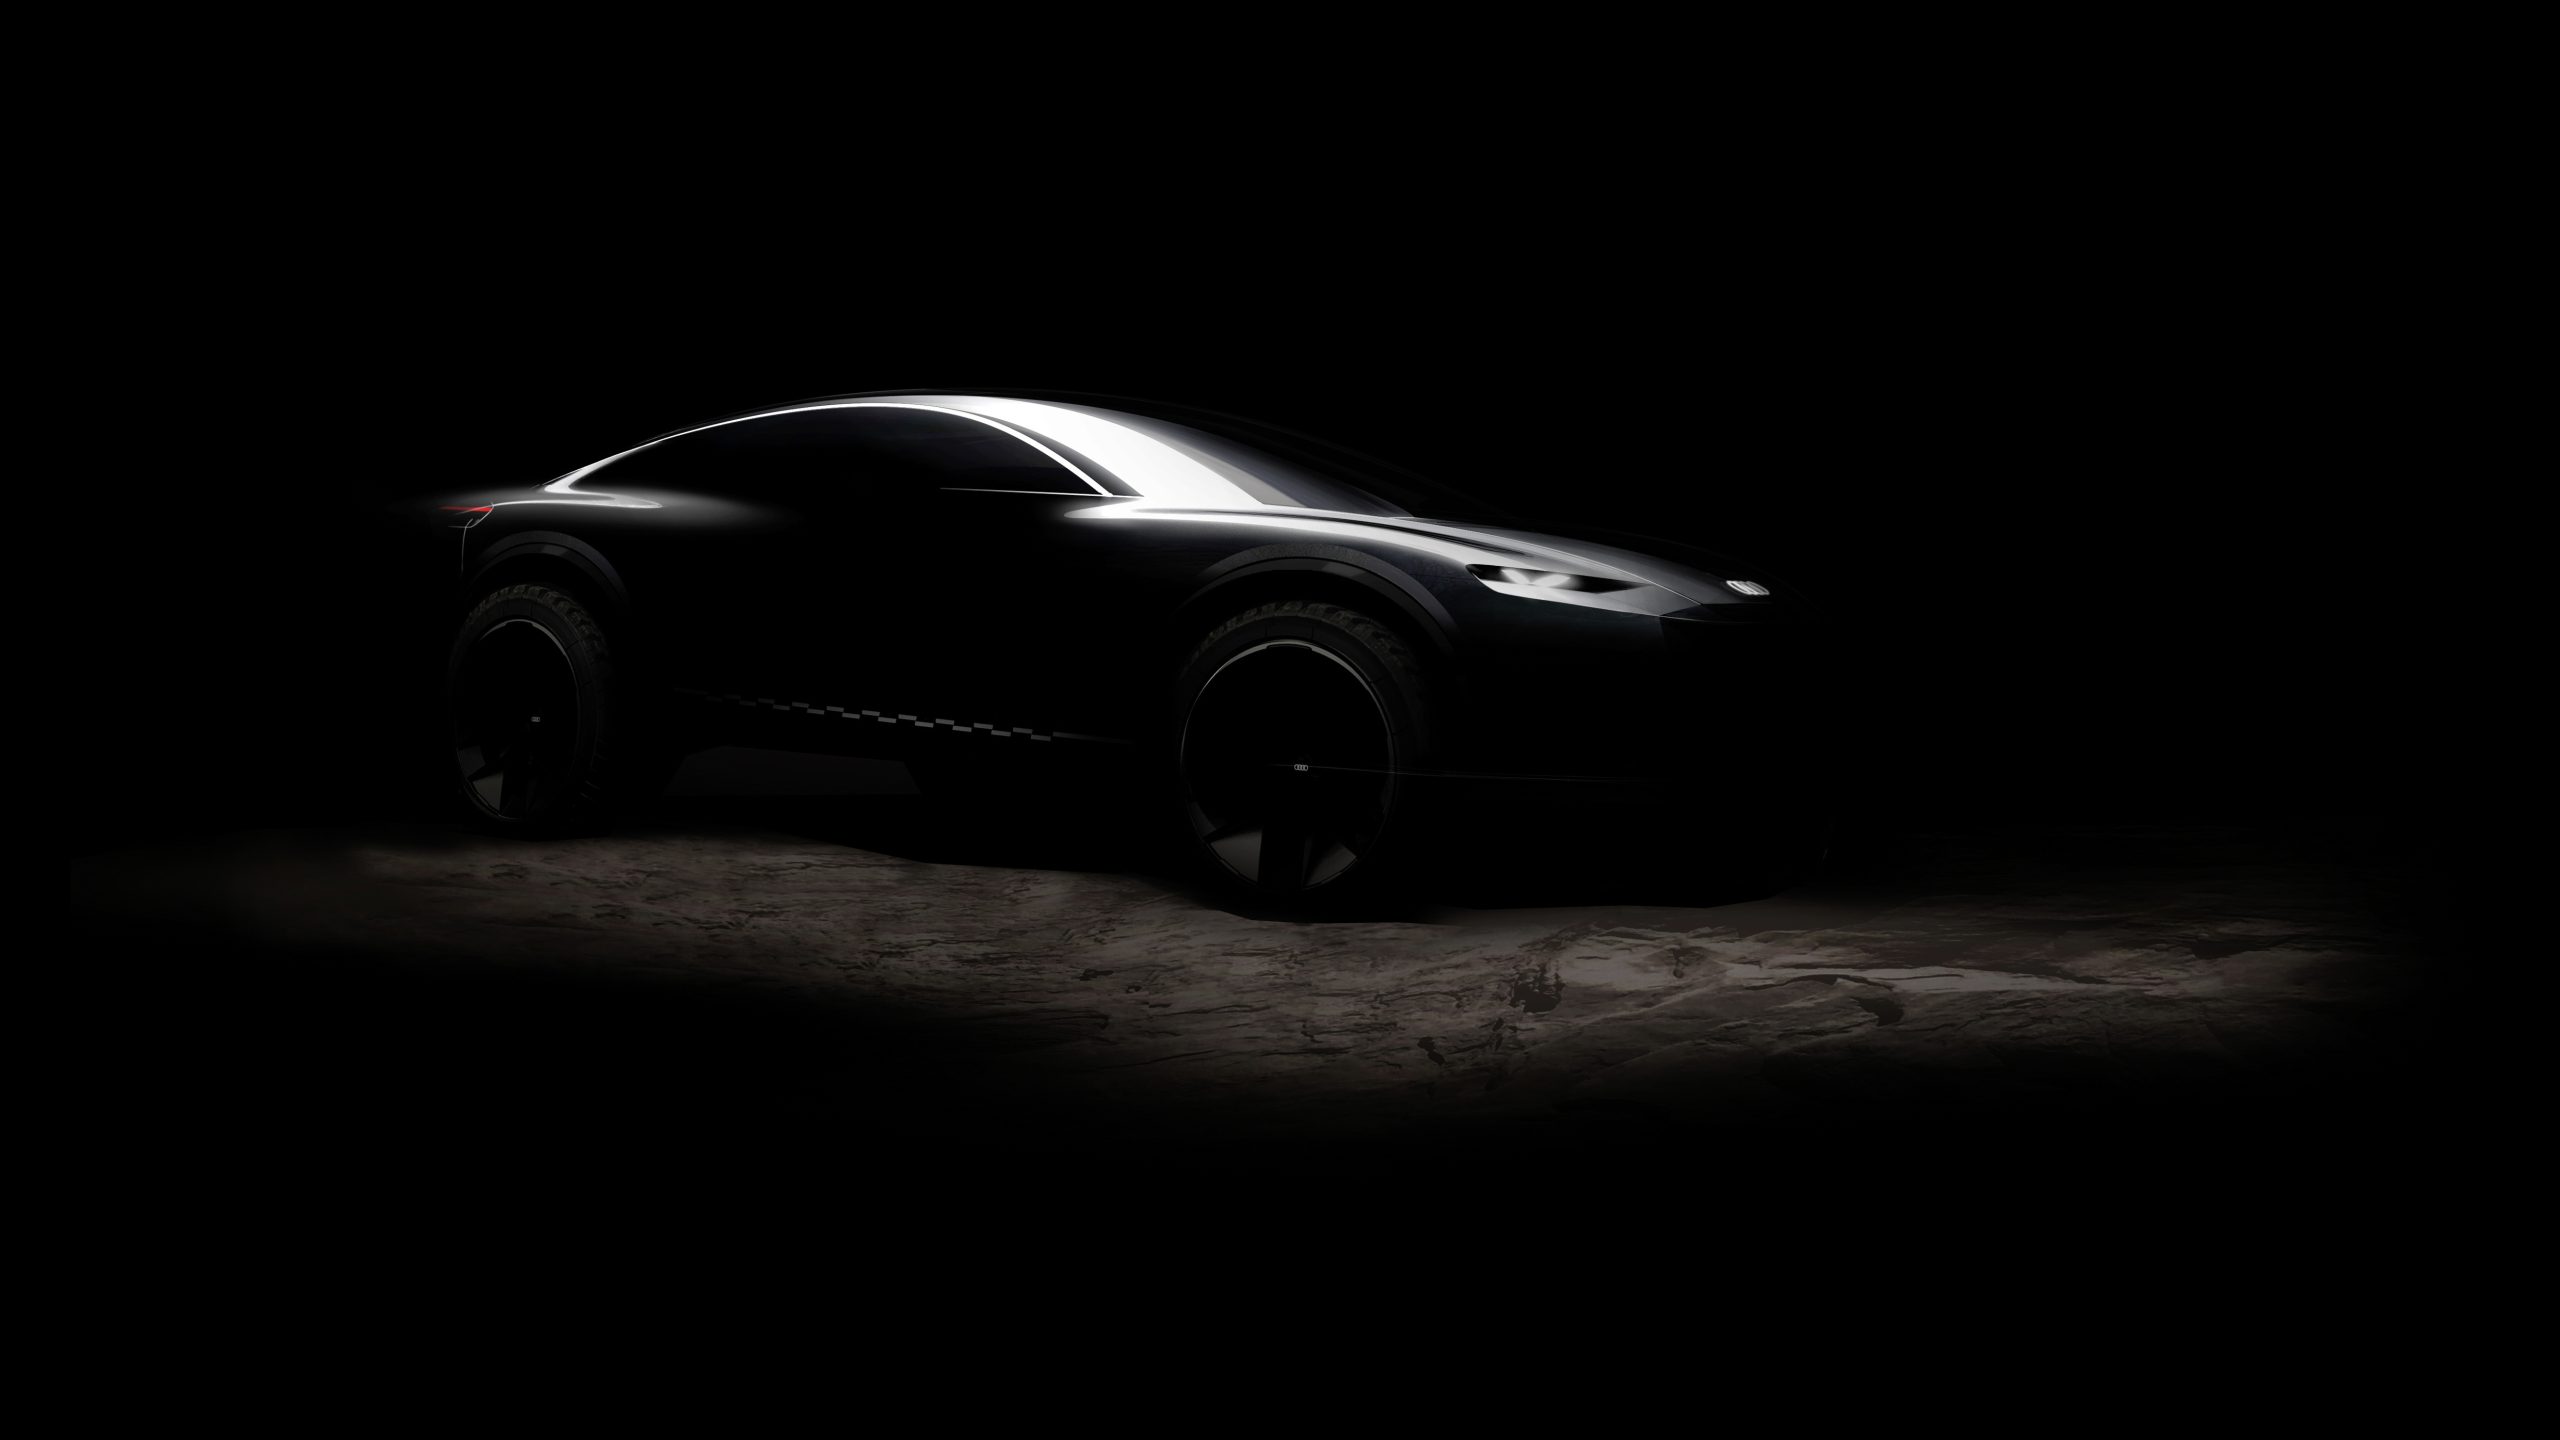 Audi Activesphere teased as the fourth model in Audi’s Sphere line of concept cars